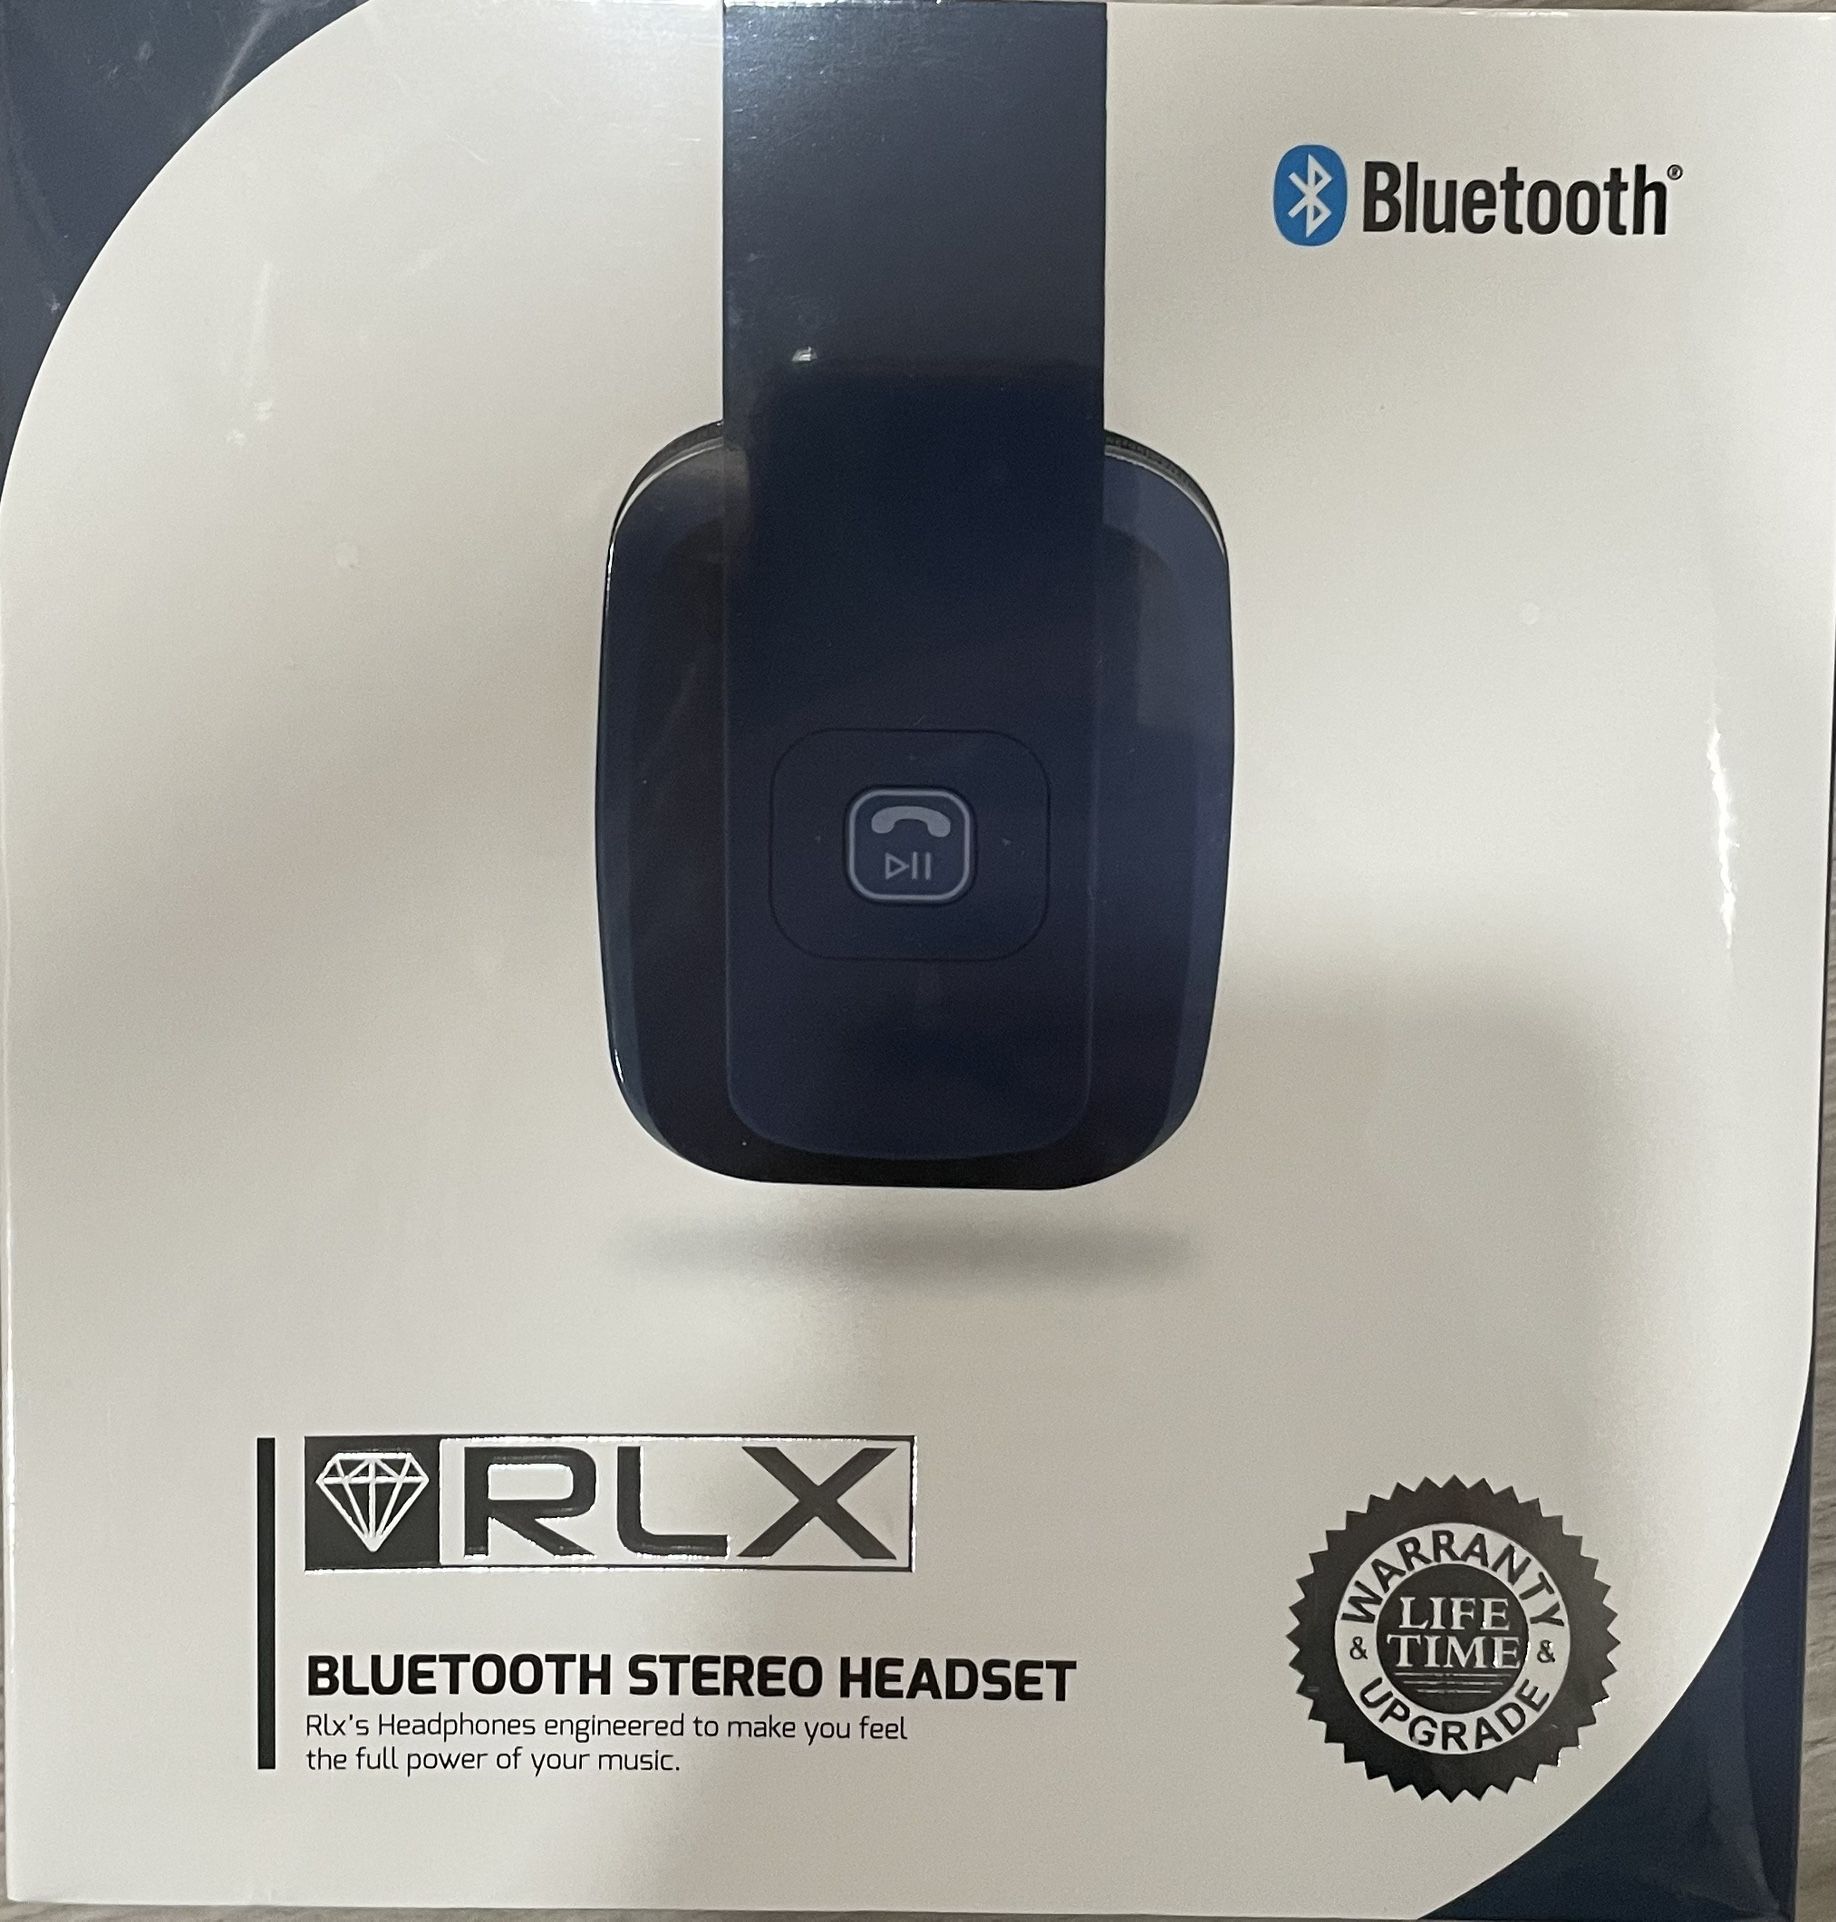 New - RLX “Bluetooth Stereo Headset” (Color: Blue)